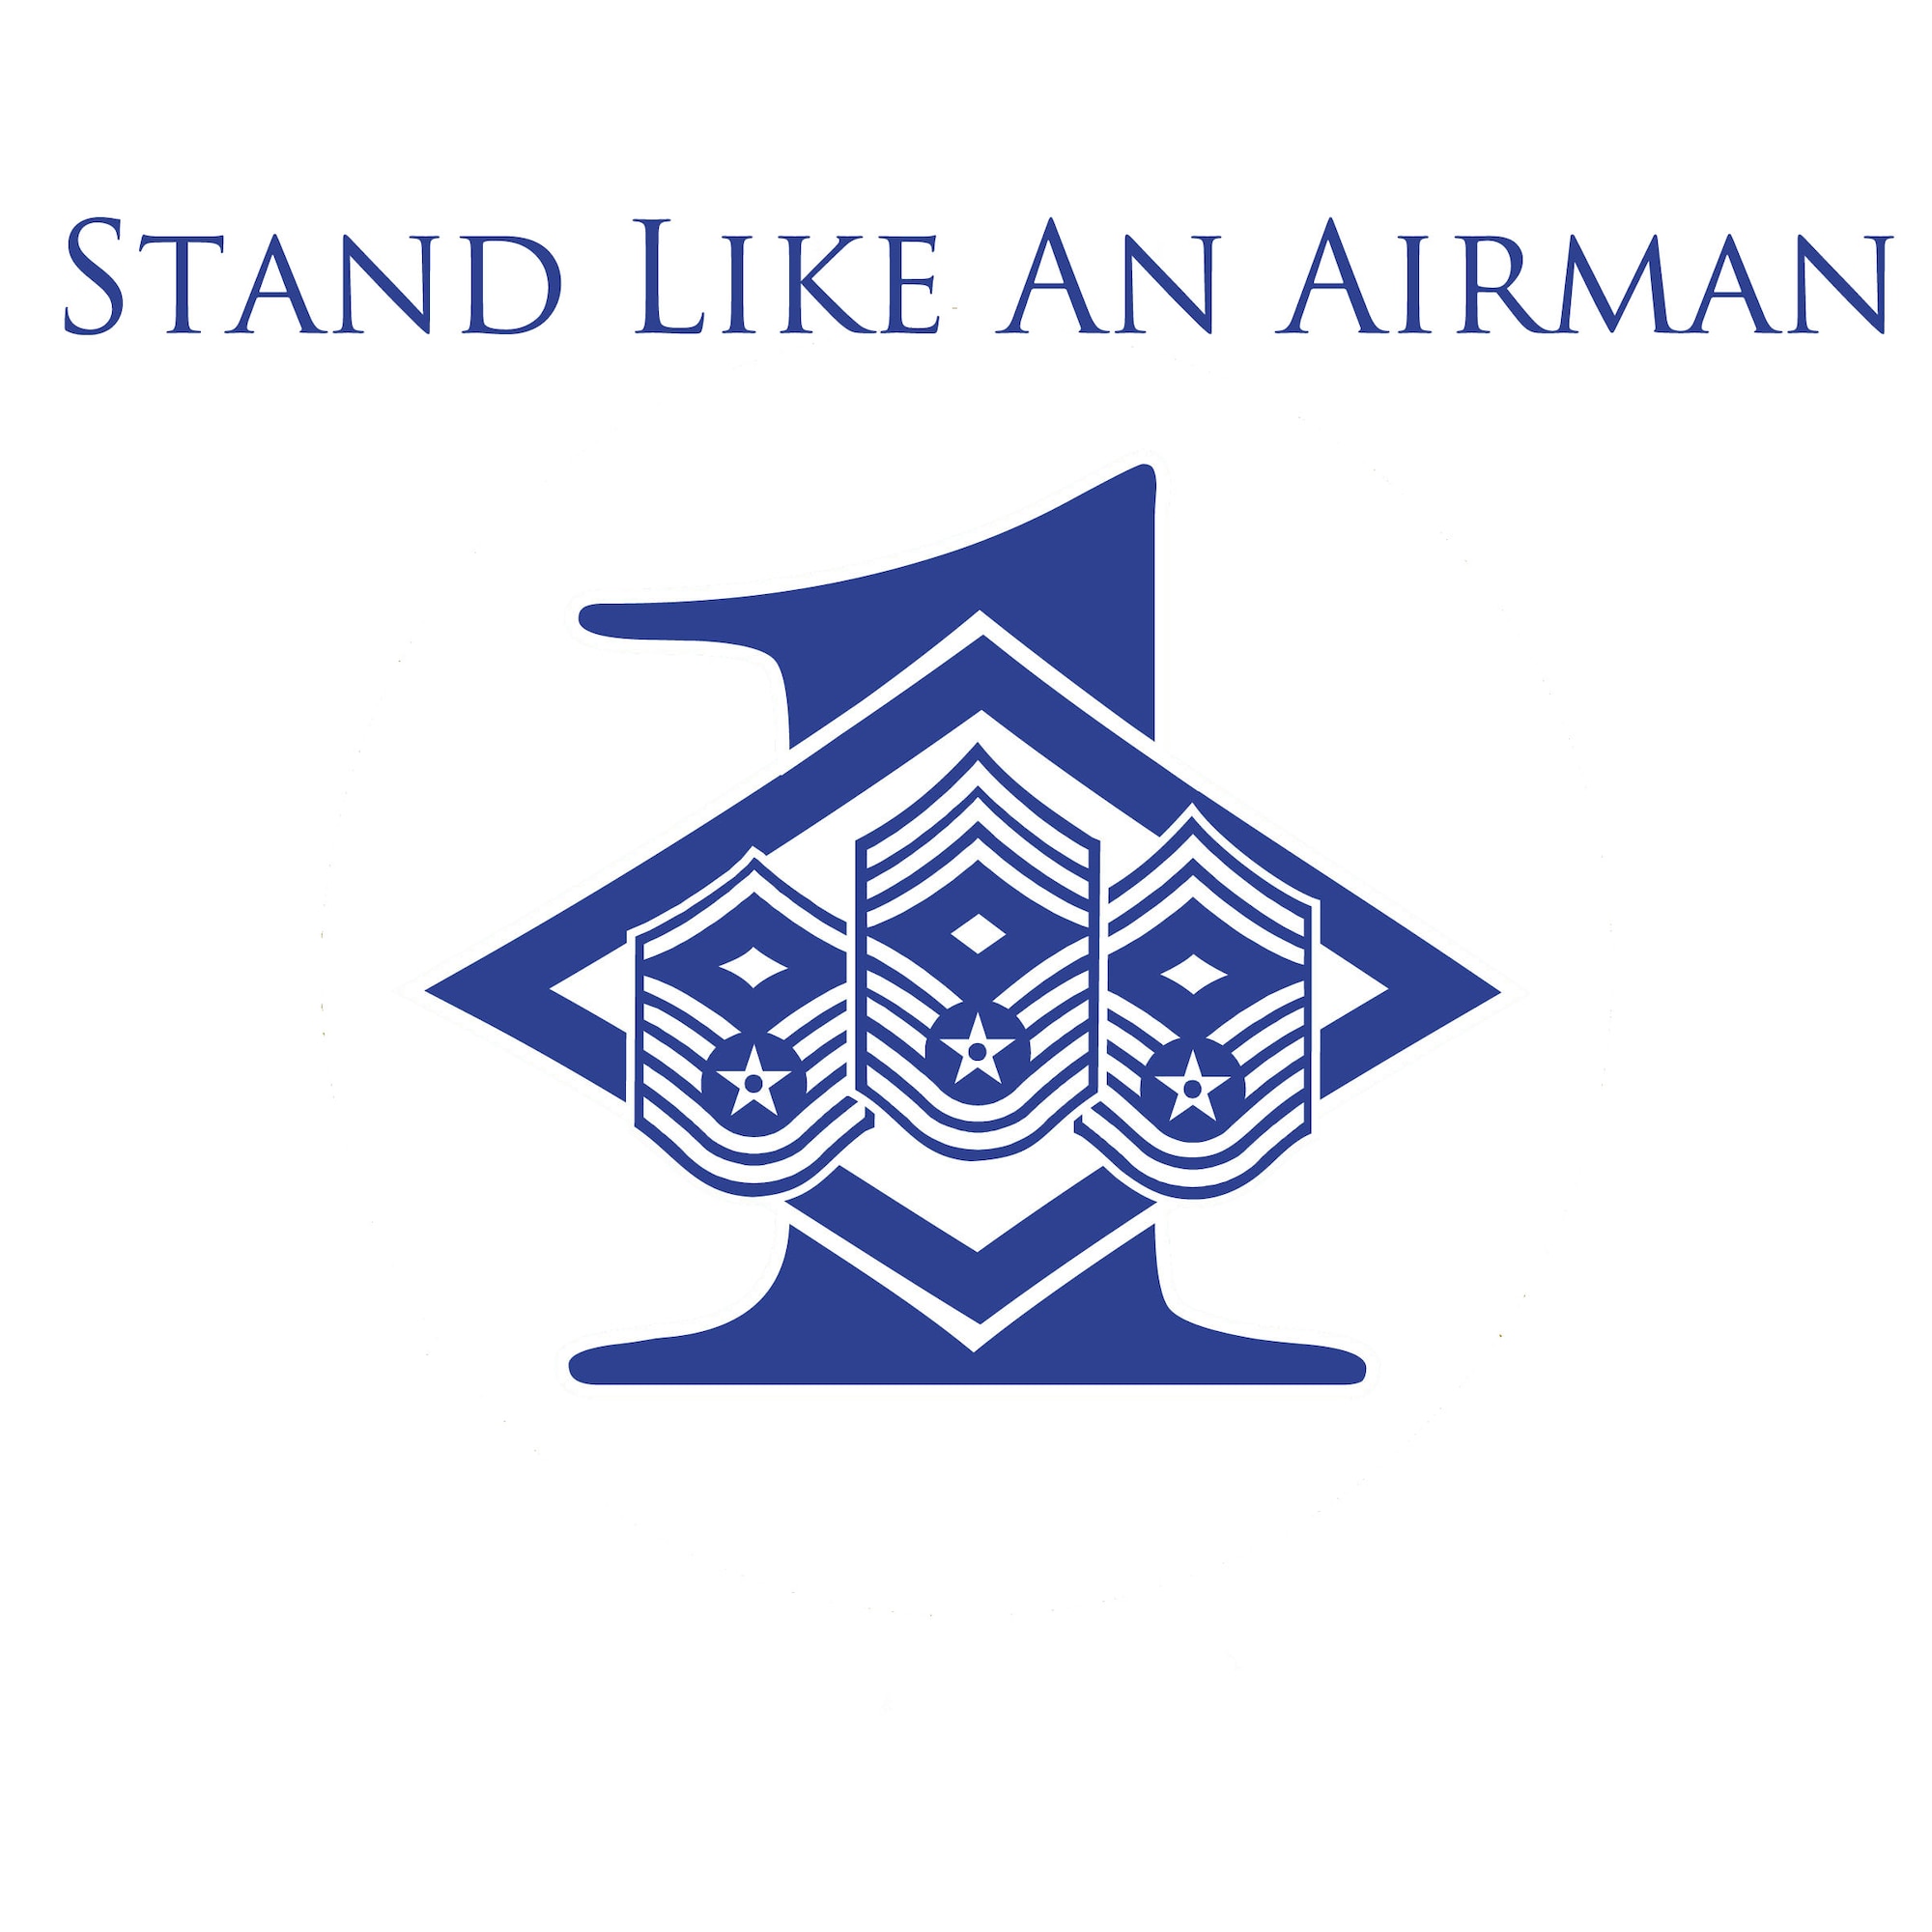 Stand Like An Airman (Air Force Illustration by Master Sgt. Michael Voss)